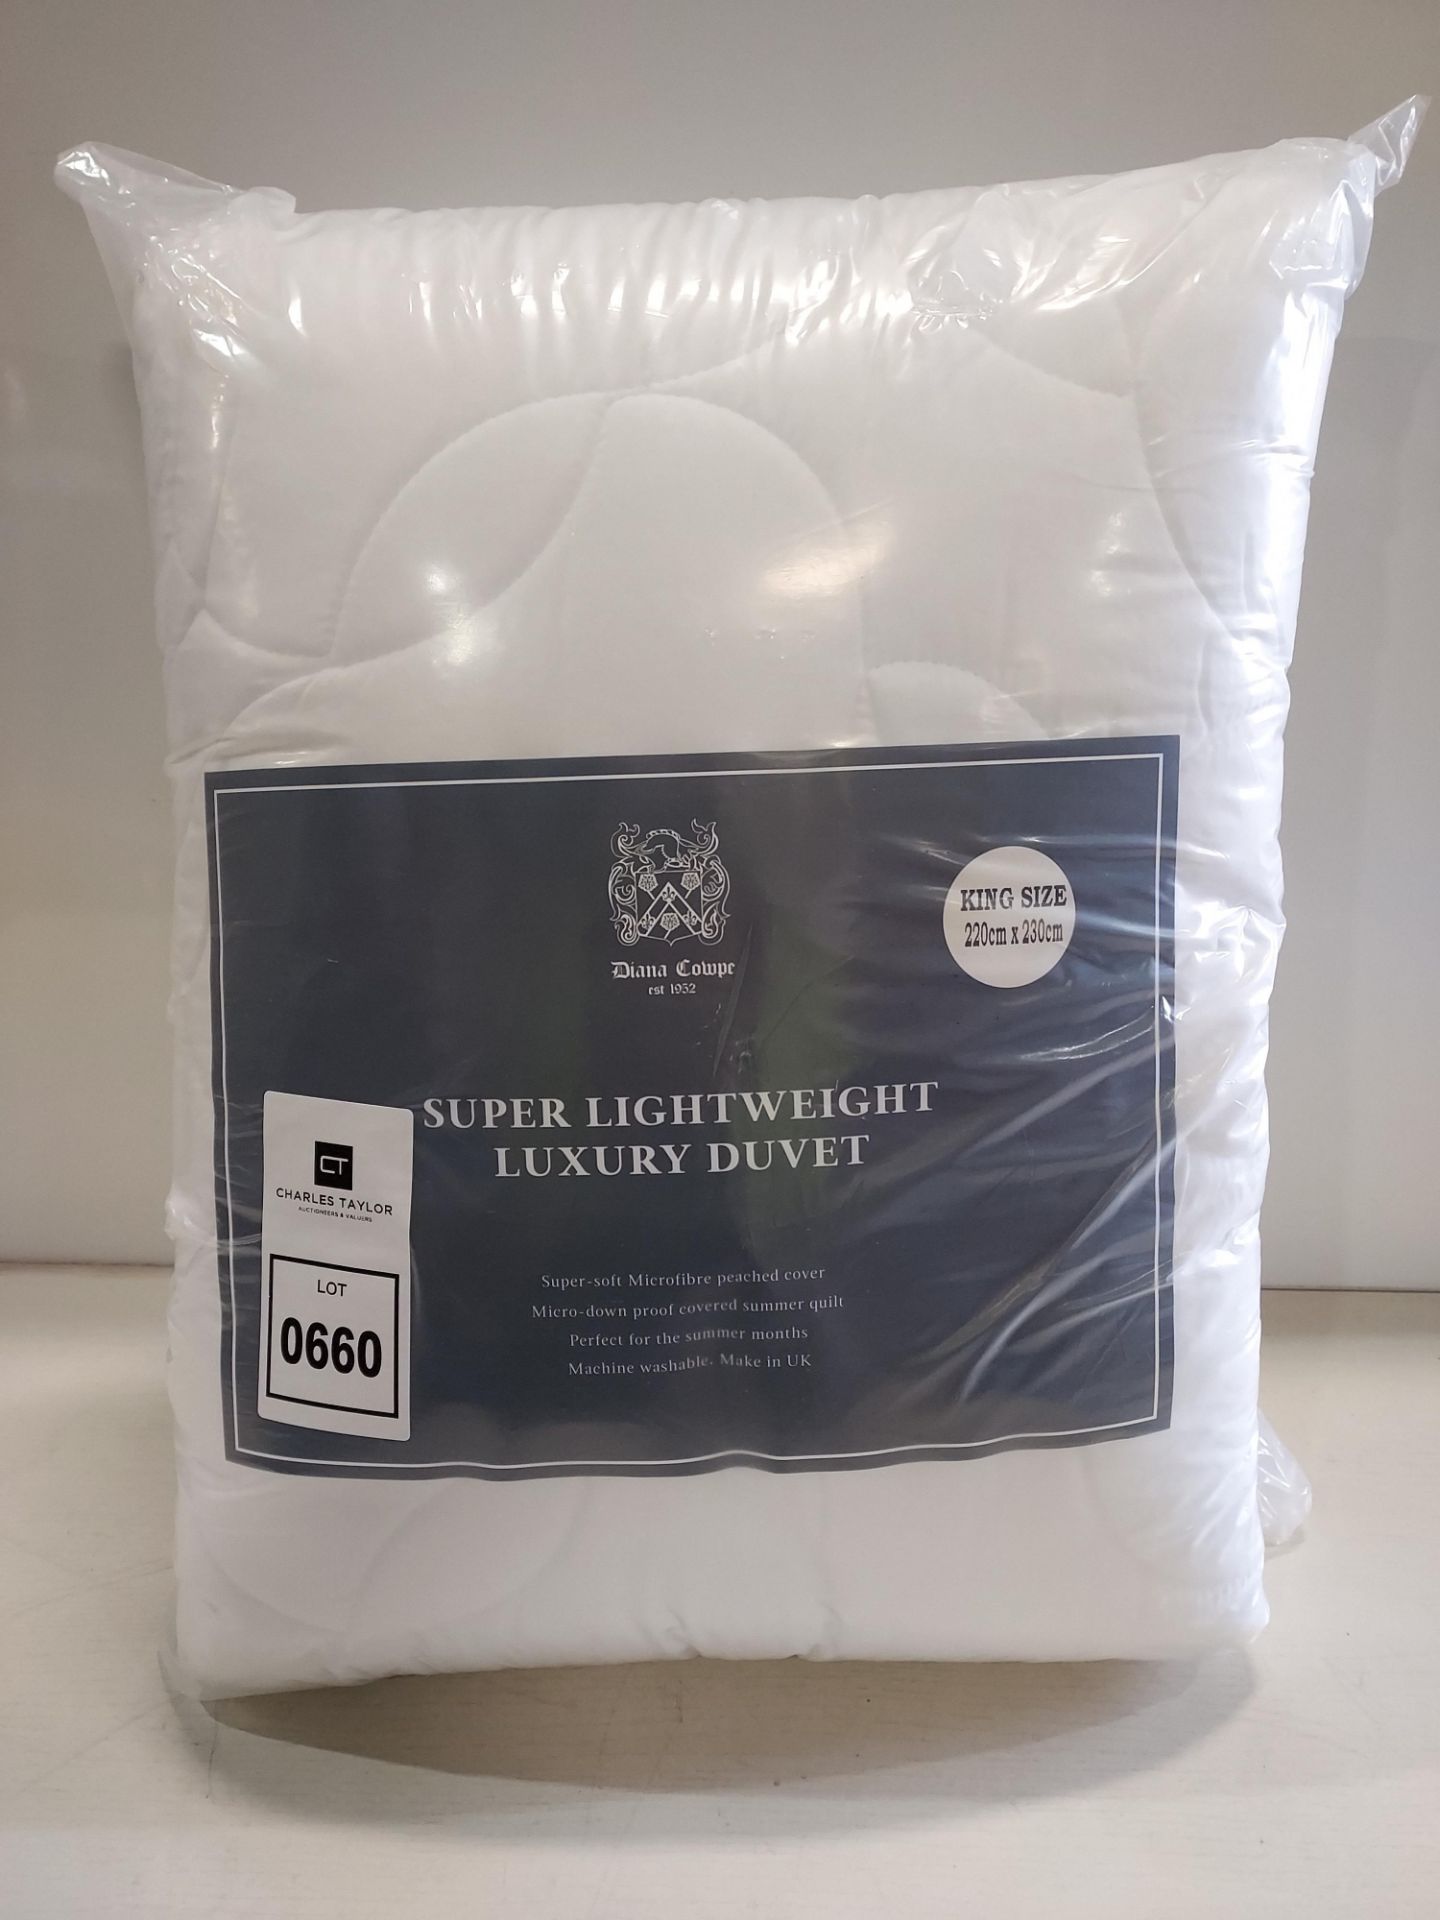 4 X BRAND NEW DIANA COMPE SUPER LIGHTWEIGHT LUXURY DUVET - WASHABLE - ALL IN KING SIZE (220 X 230 CM